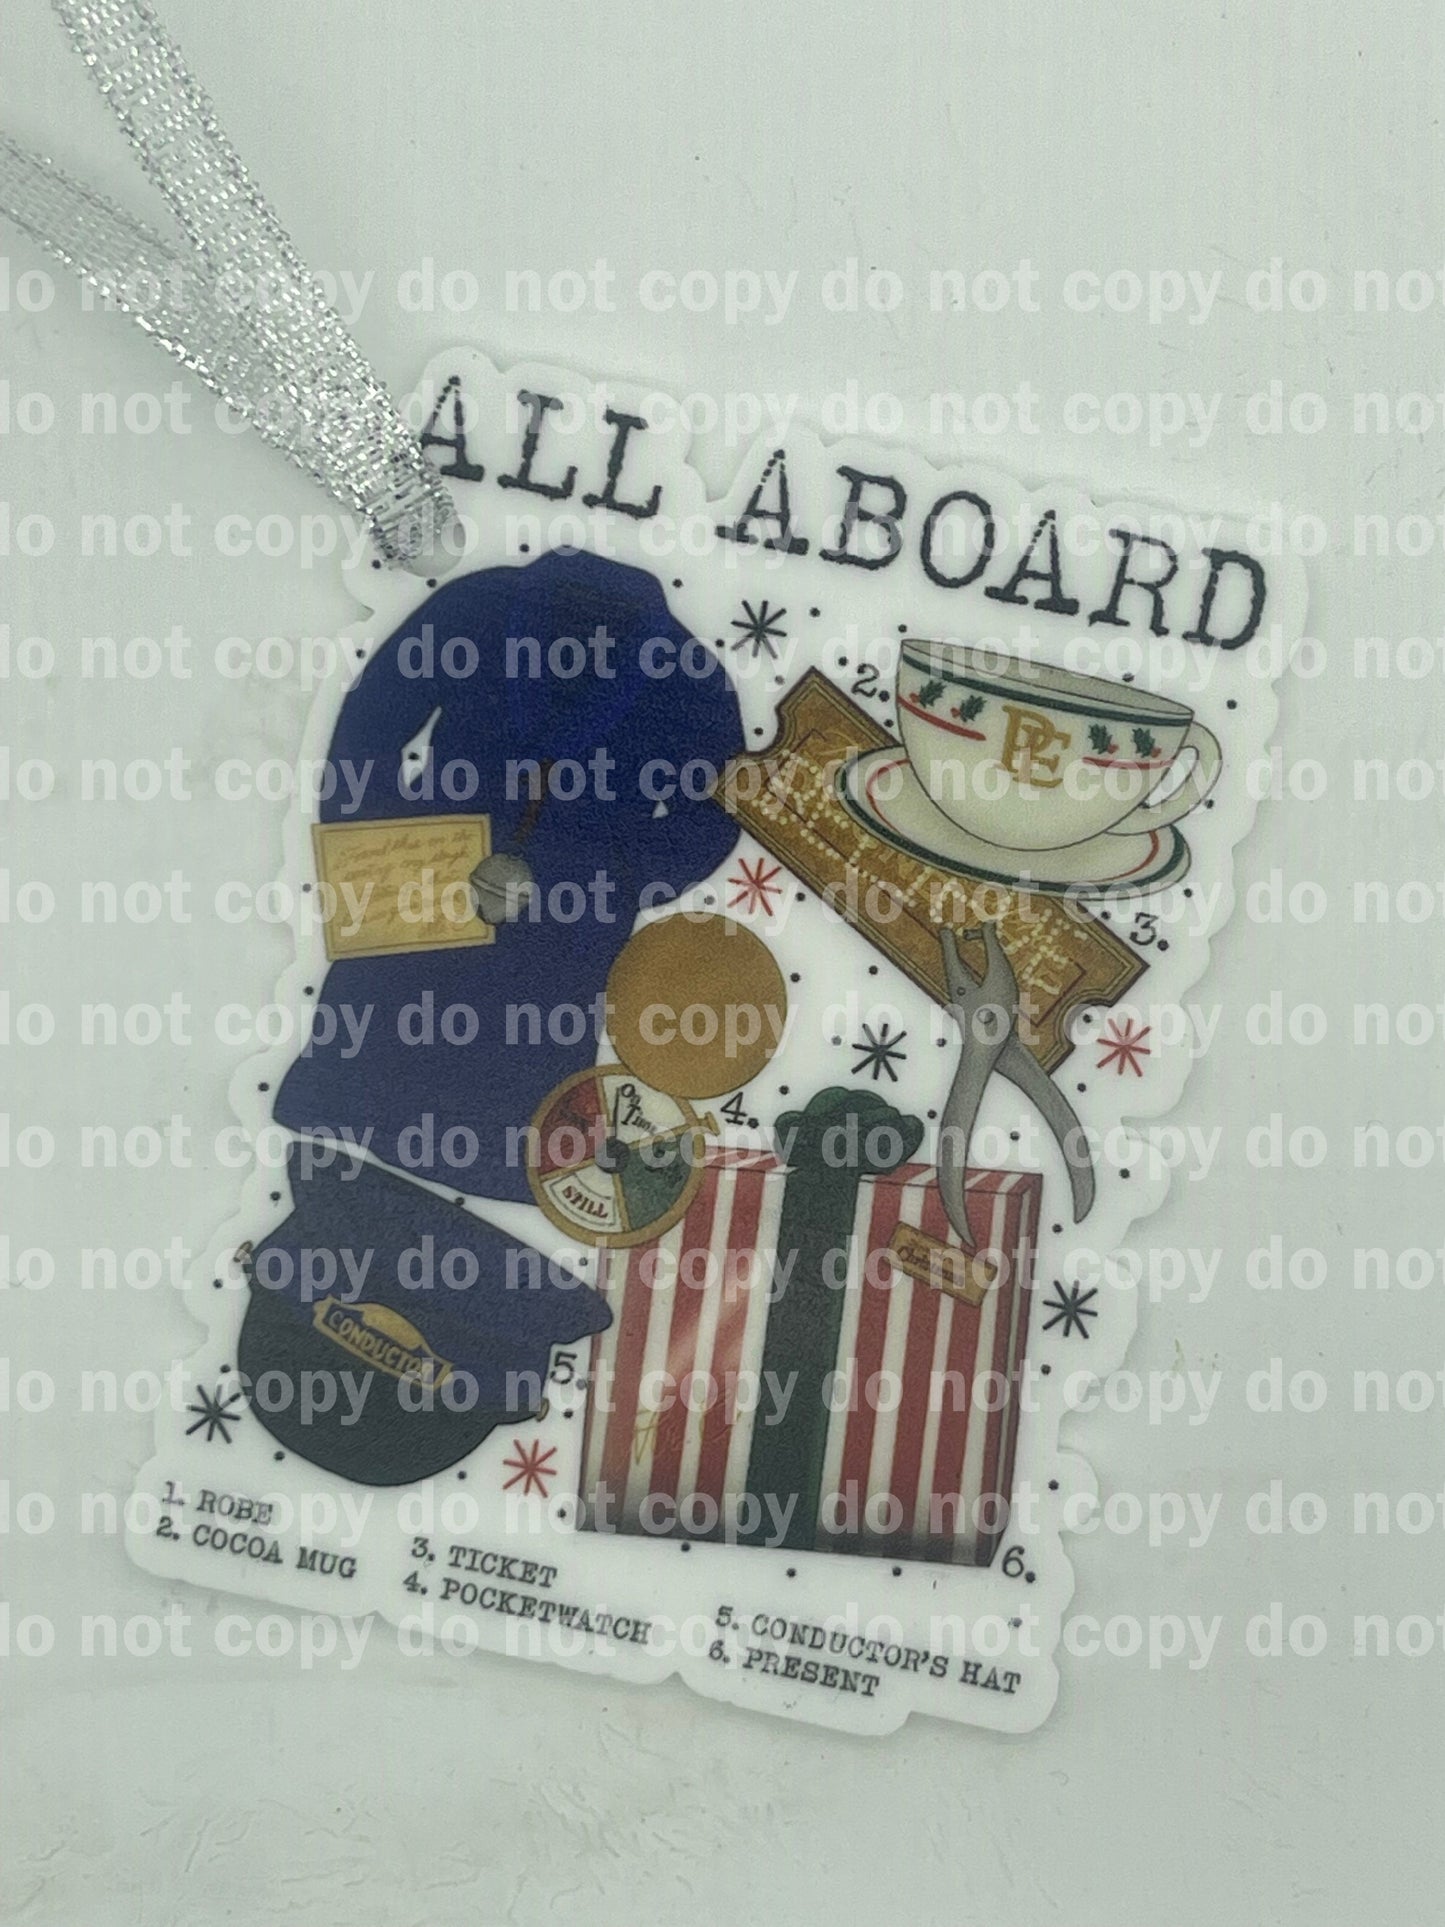 All aboard inspired Christmas ornament uv print and acrylic